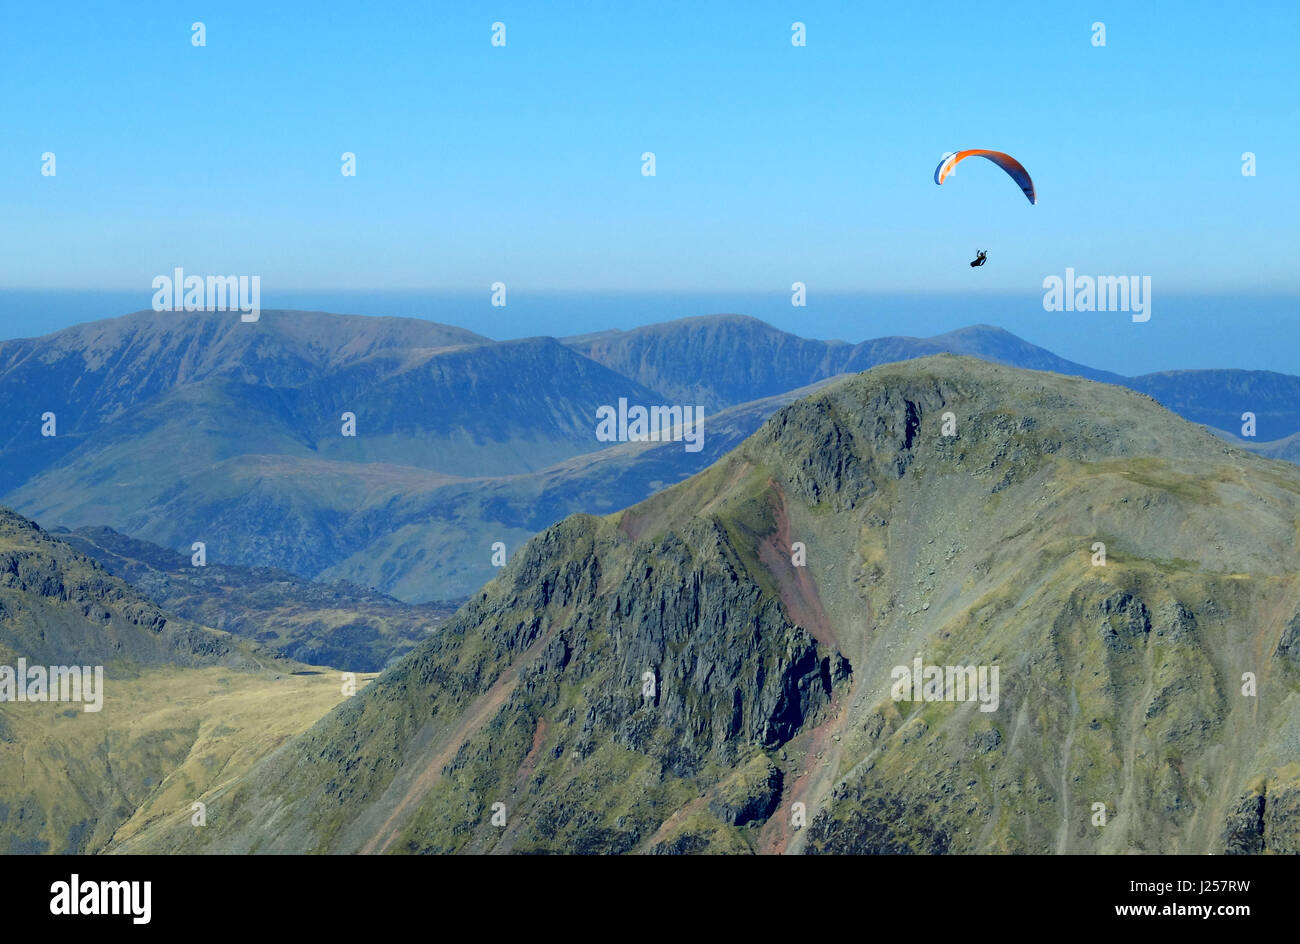 Paraglider launching from the peak of Scafell Pike and paragliding over the fells of the English Lake District, Cumbria Stock Photo